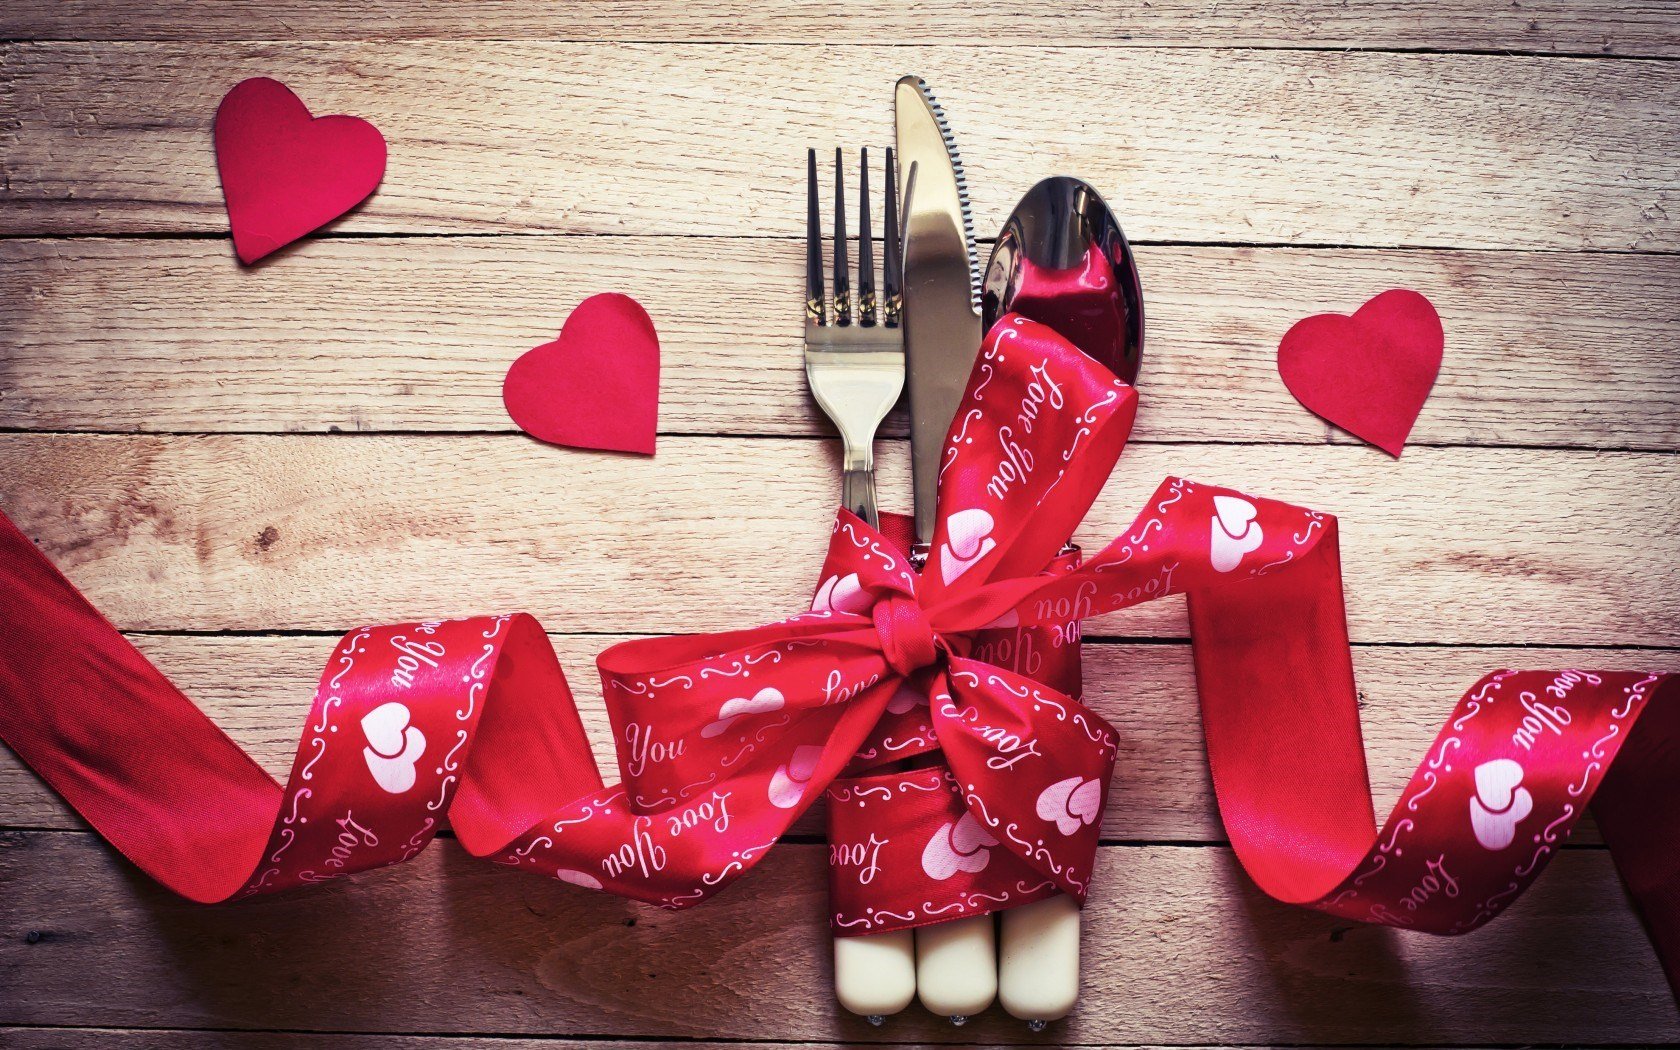 food, Fork, Heart, Hearts, Holidays, Knife, Red, Ribbon, Romance, Spoon, Valentine, Wooden, Table Wallpaper